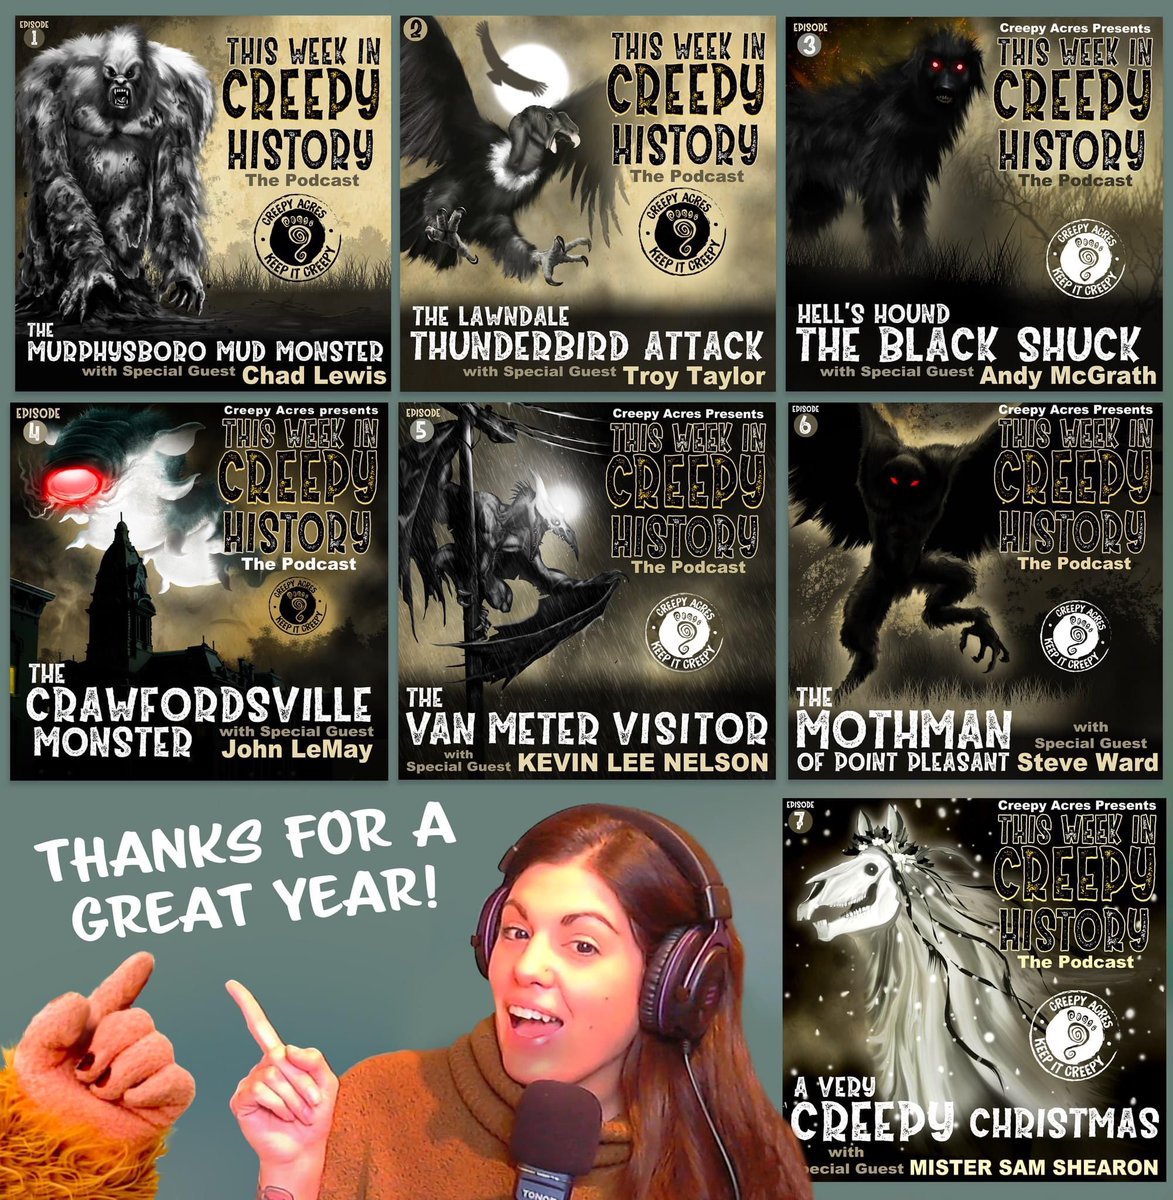 Thank You all for listening to the Creepy Acres This Week in Creepy History Podcast! And a big Thank you to all our first year guests: Chad Lewis, Troy Taylor, Andy Mcgrath, John LeMay, Kevin Lee Nelson, Steve Ward, and Mister Sam Shearon!  HAPPY NEW YEAR!!!